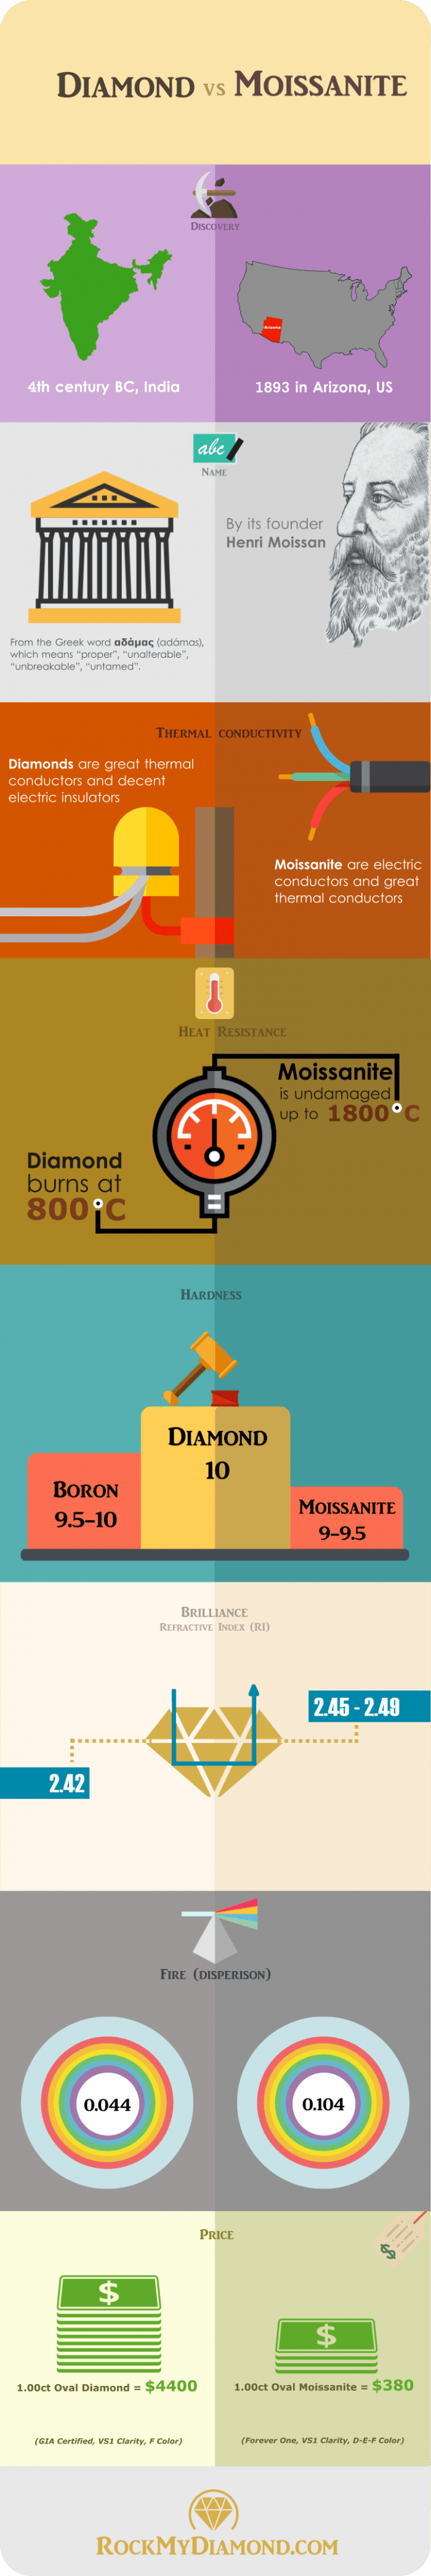 infographic describes differences between moissanite and diamonds